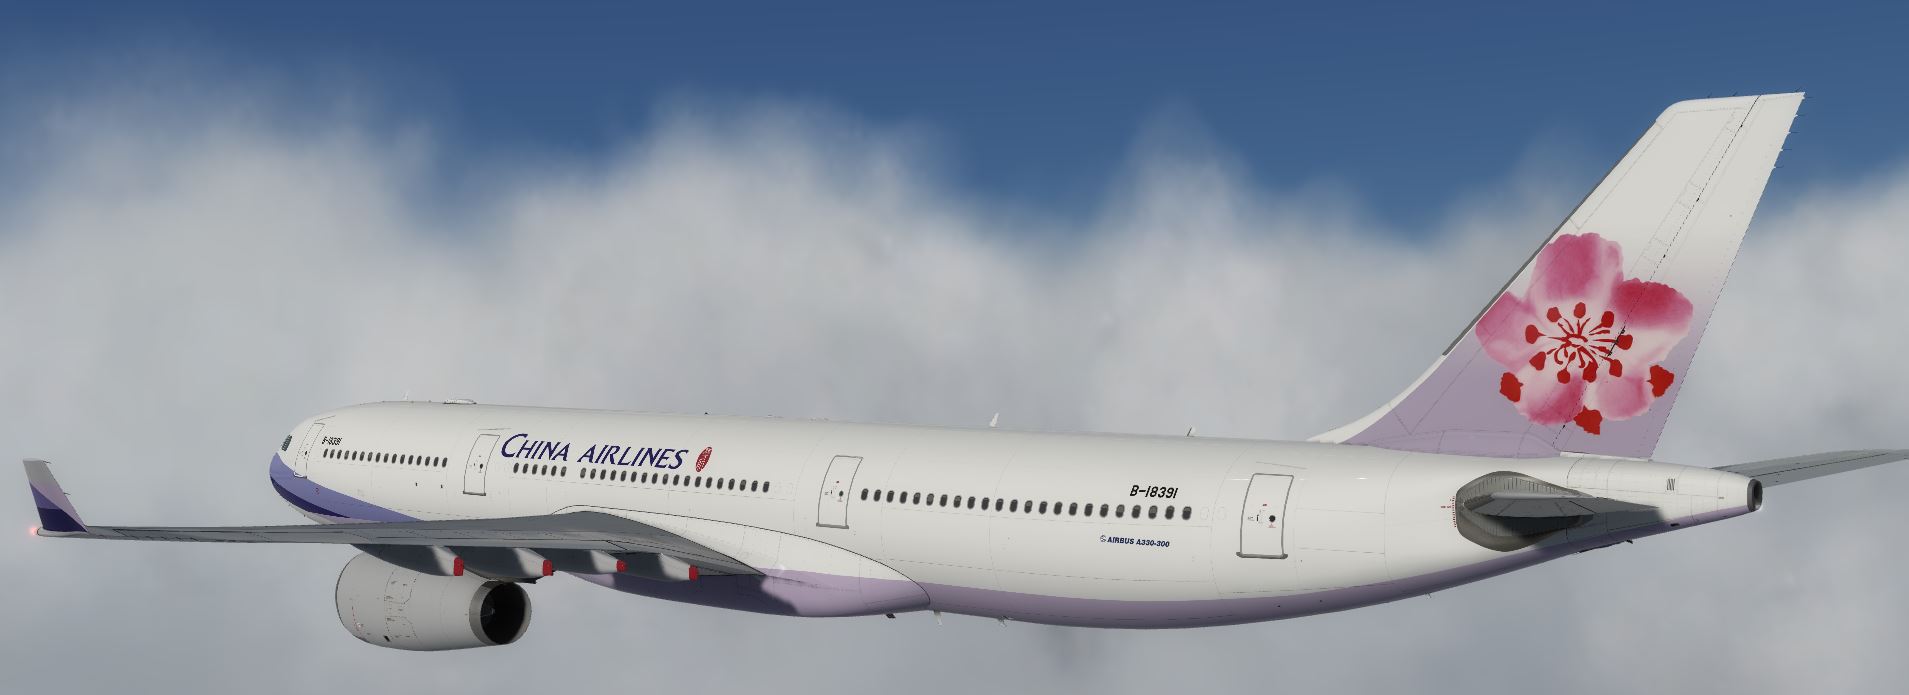 AS A330 ChinaAirline-9344 